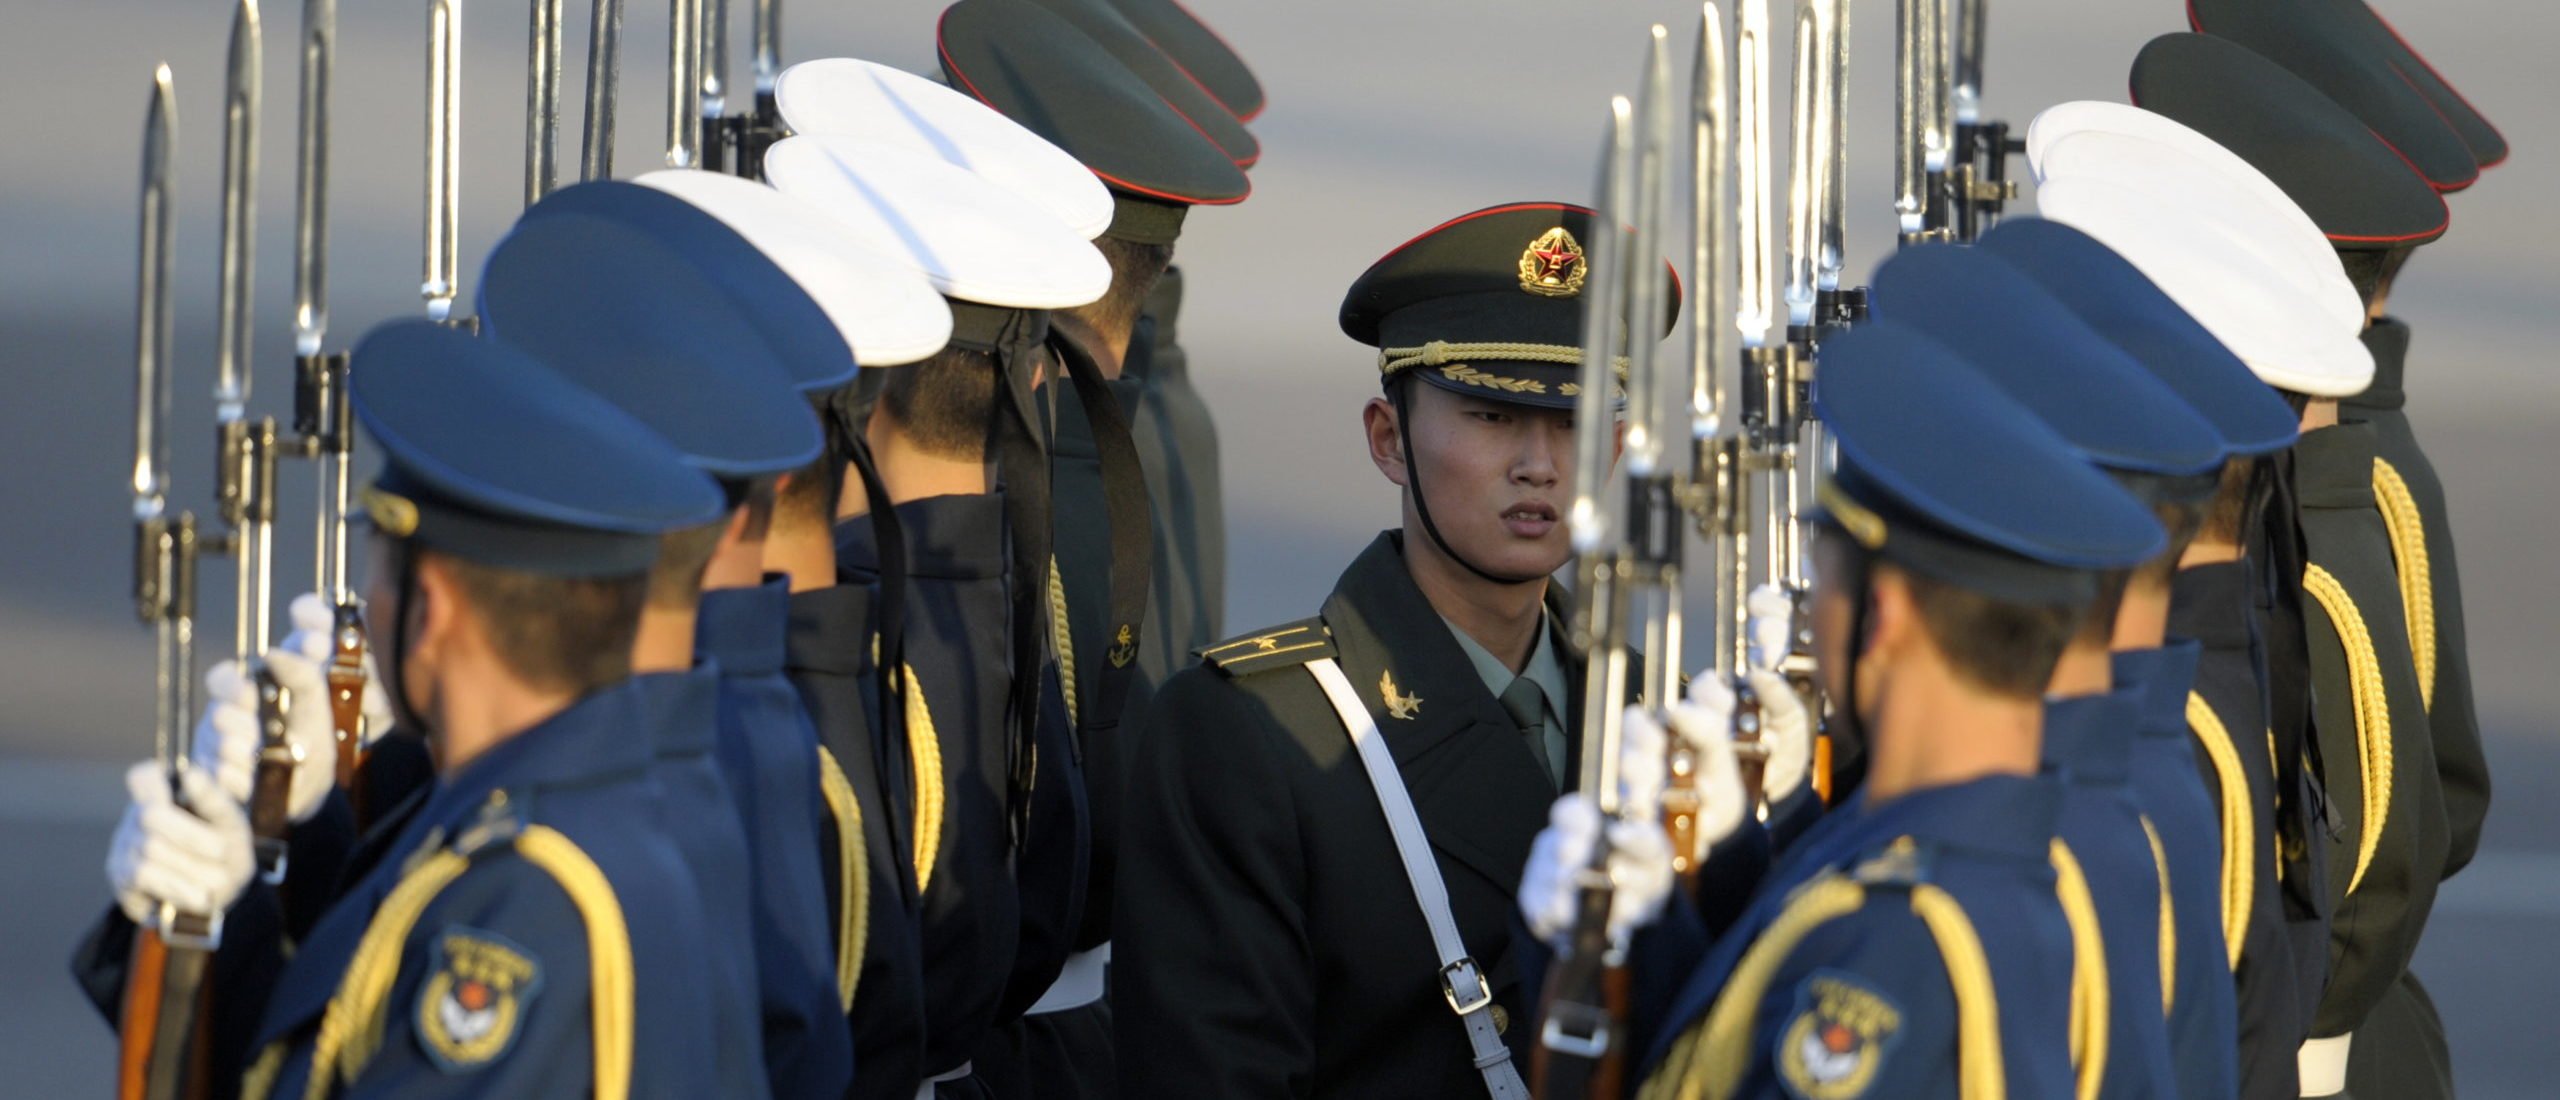 Chinese Military Takes Control Of War Powers With New Legislation | The ...